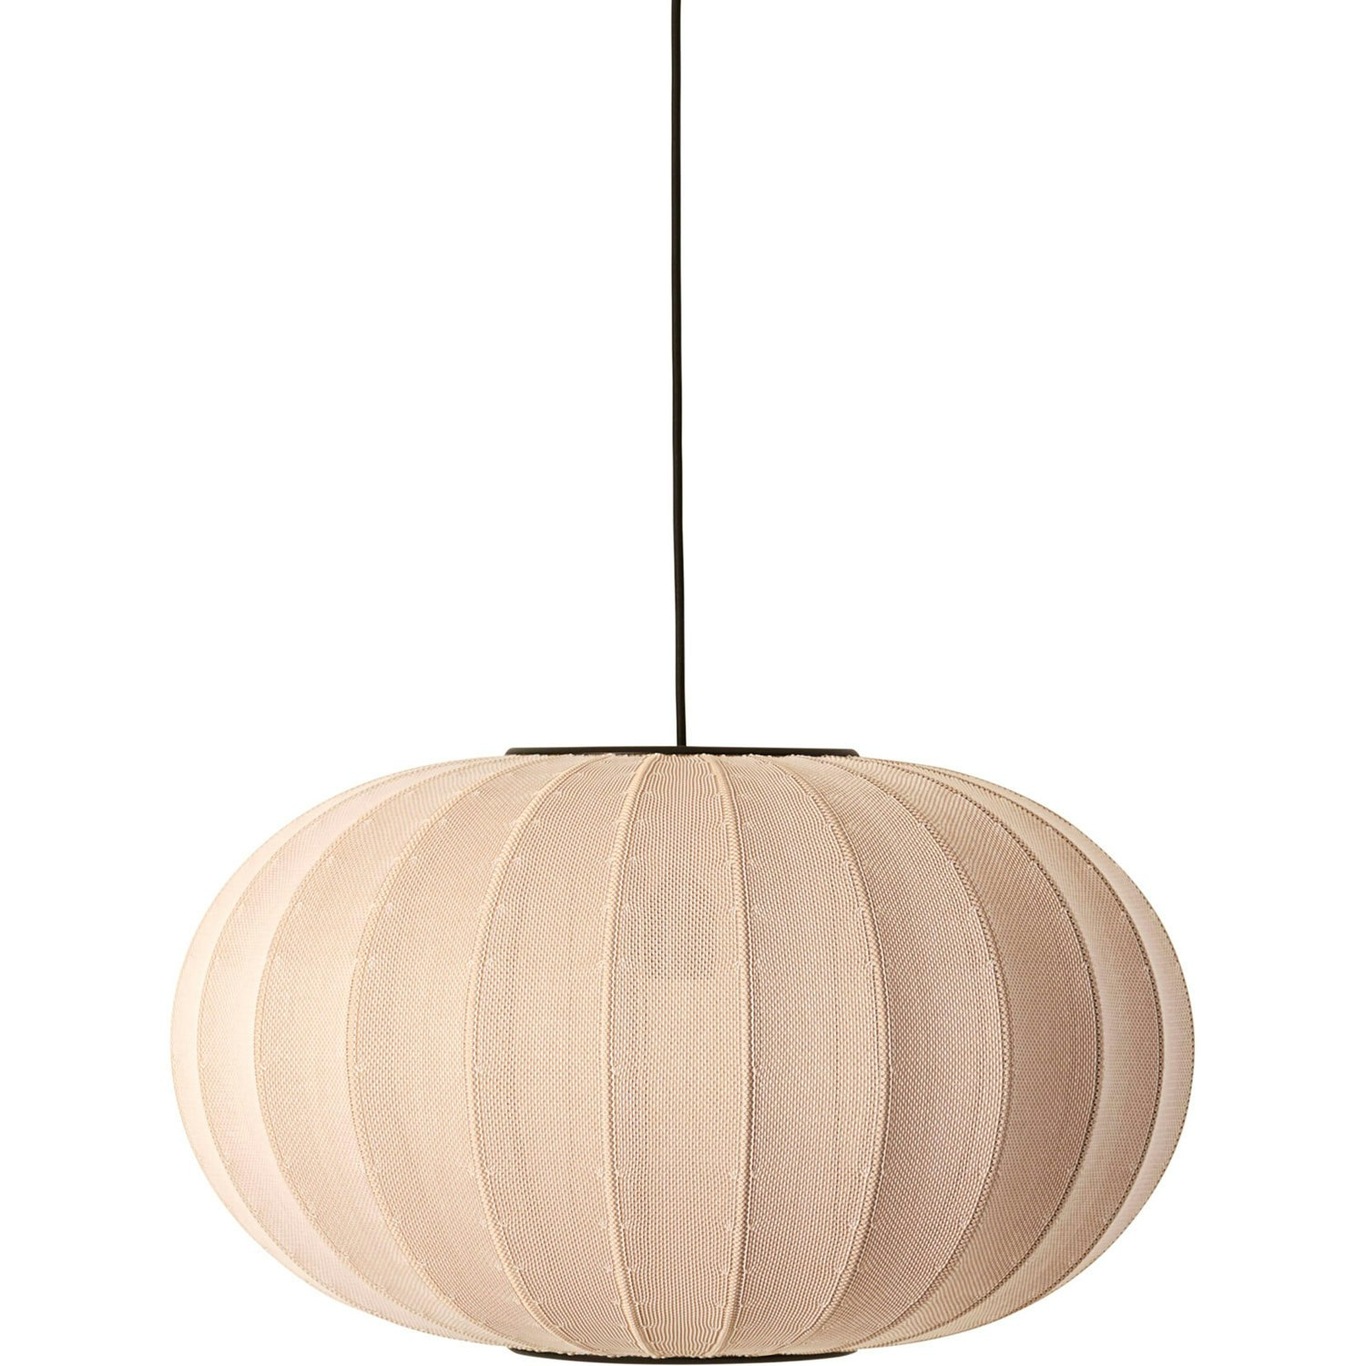 Knit-Wit Hanglamp Ovaal 57 cm, Sand Stone